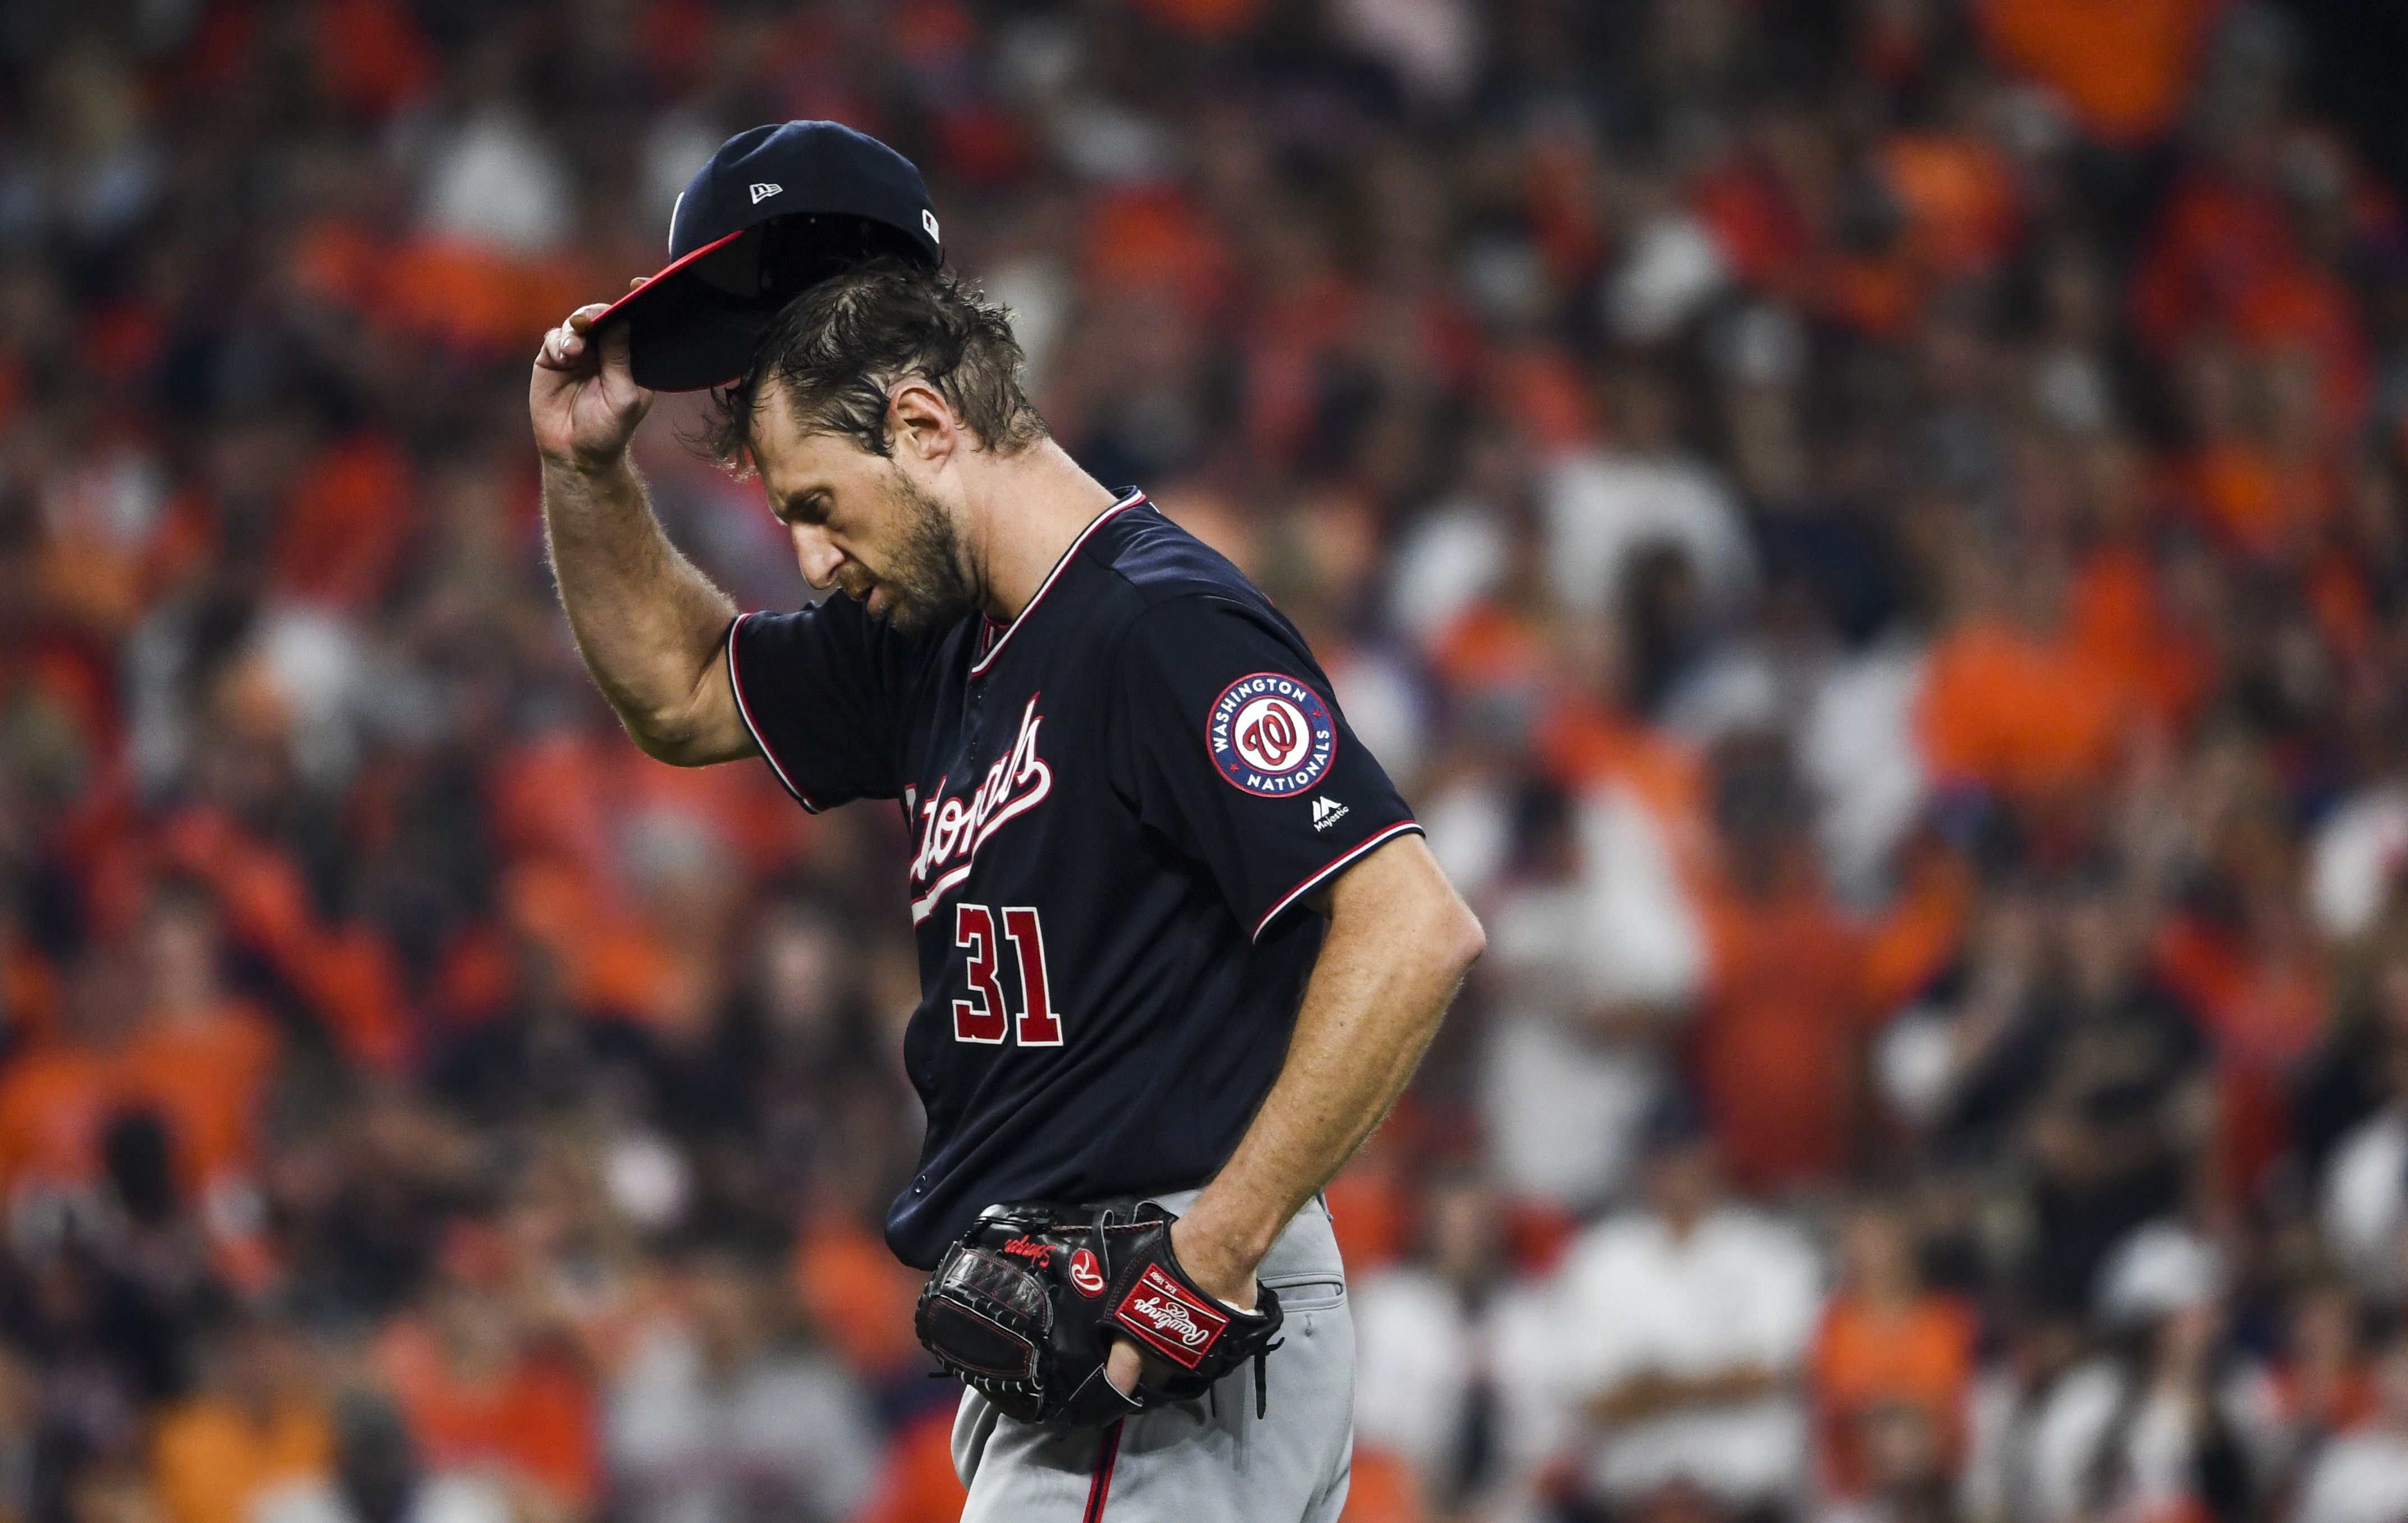 World Series Game 5: Gerrit Cole dominates as Astros beat Nationals -  Sports Illustrated